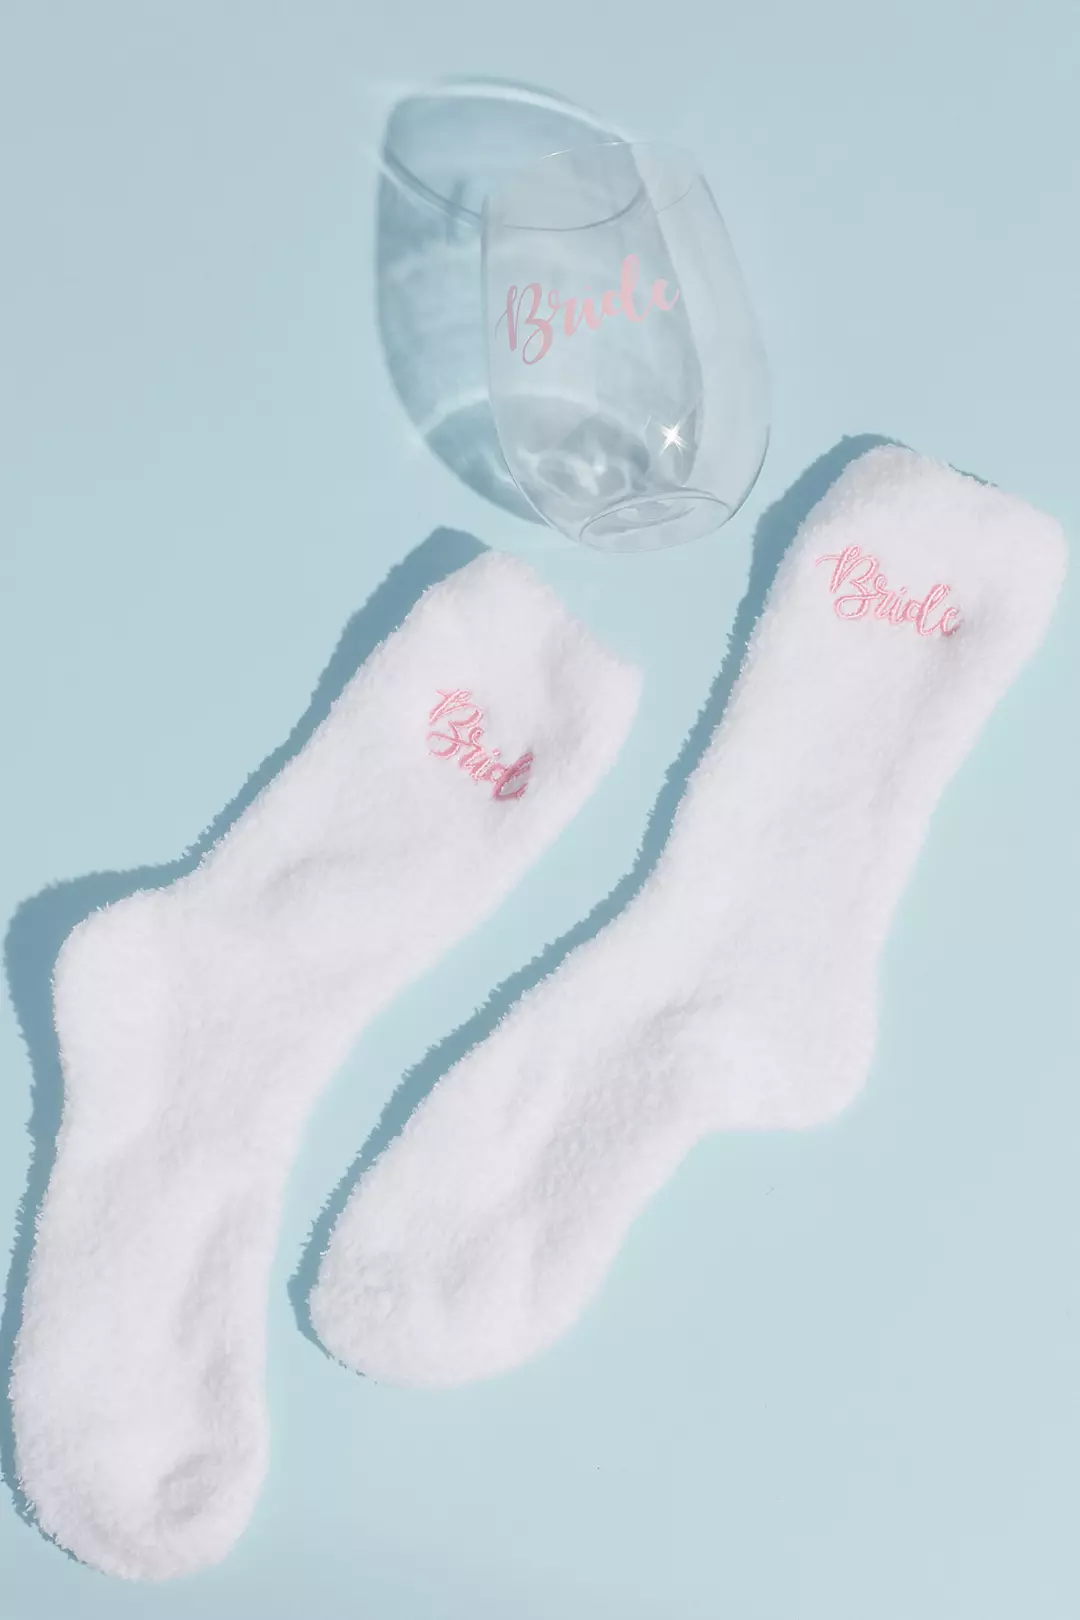 Bride Wine Glass and Fuzzy Socks Gift Set Image